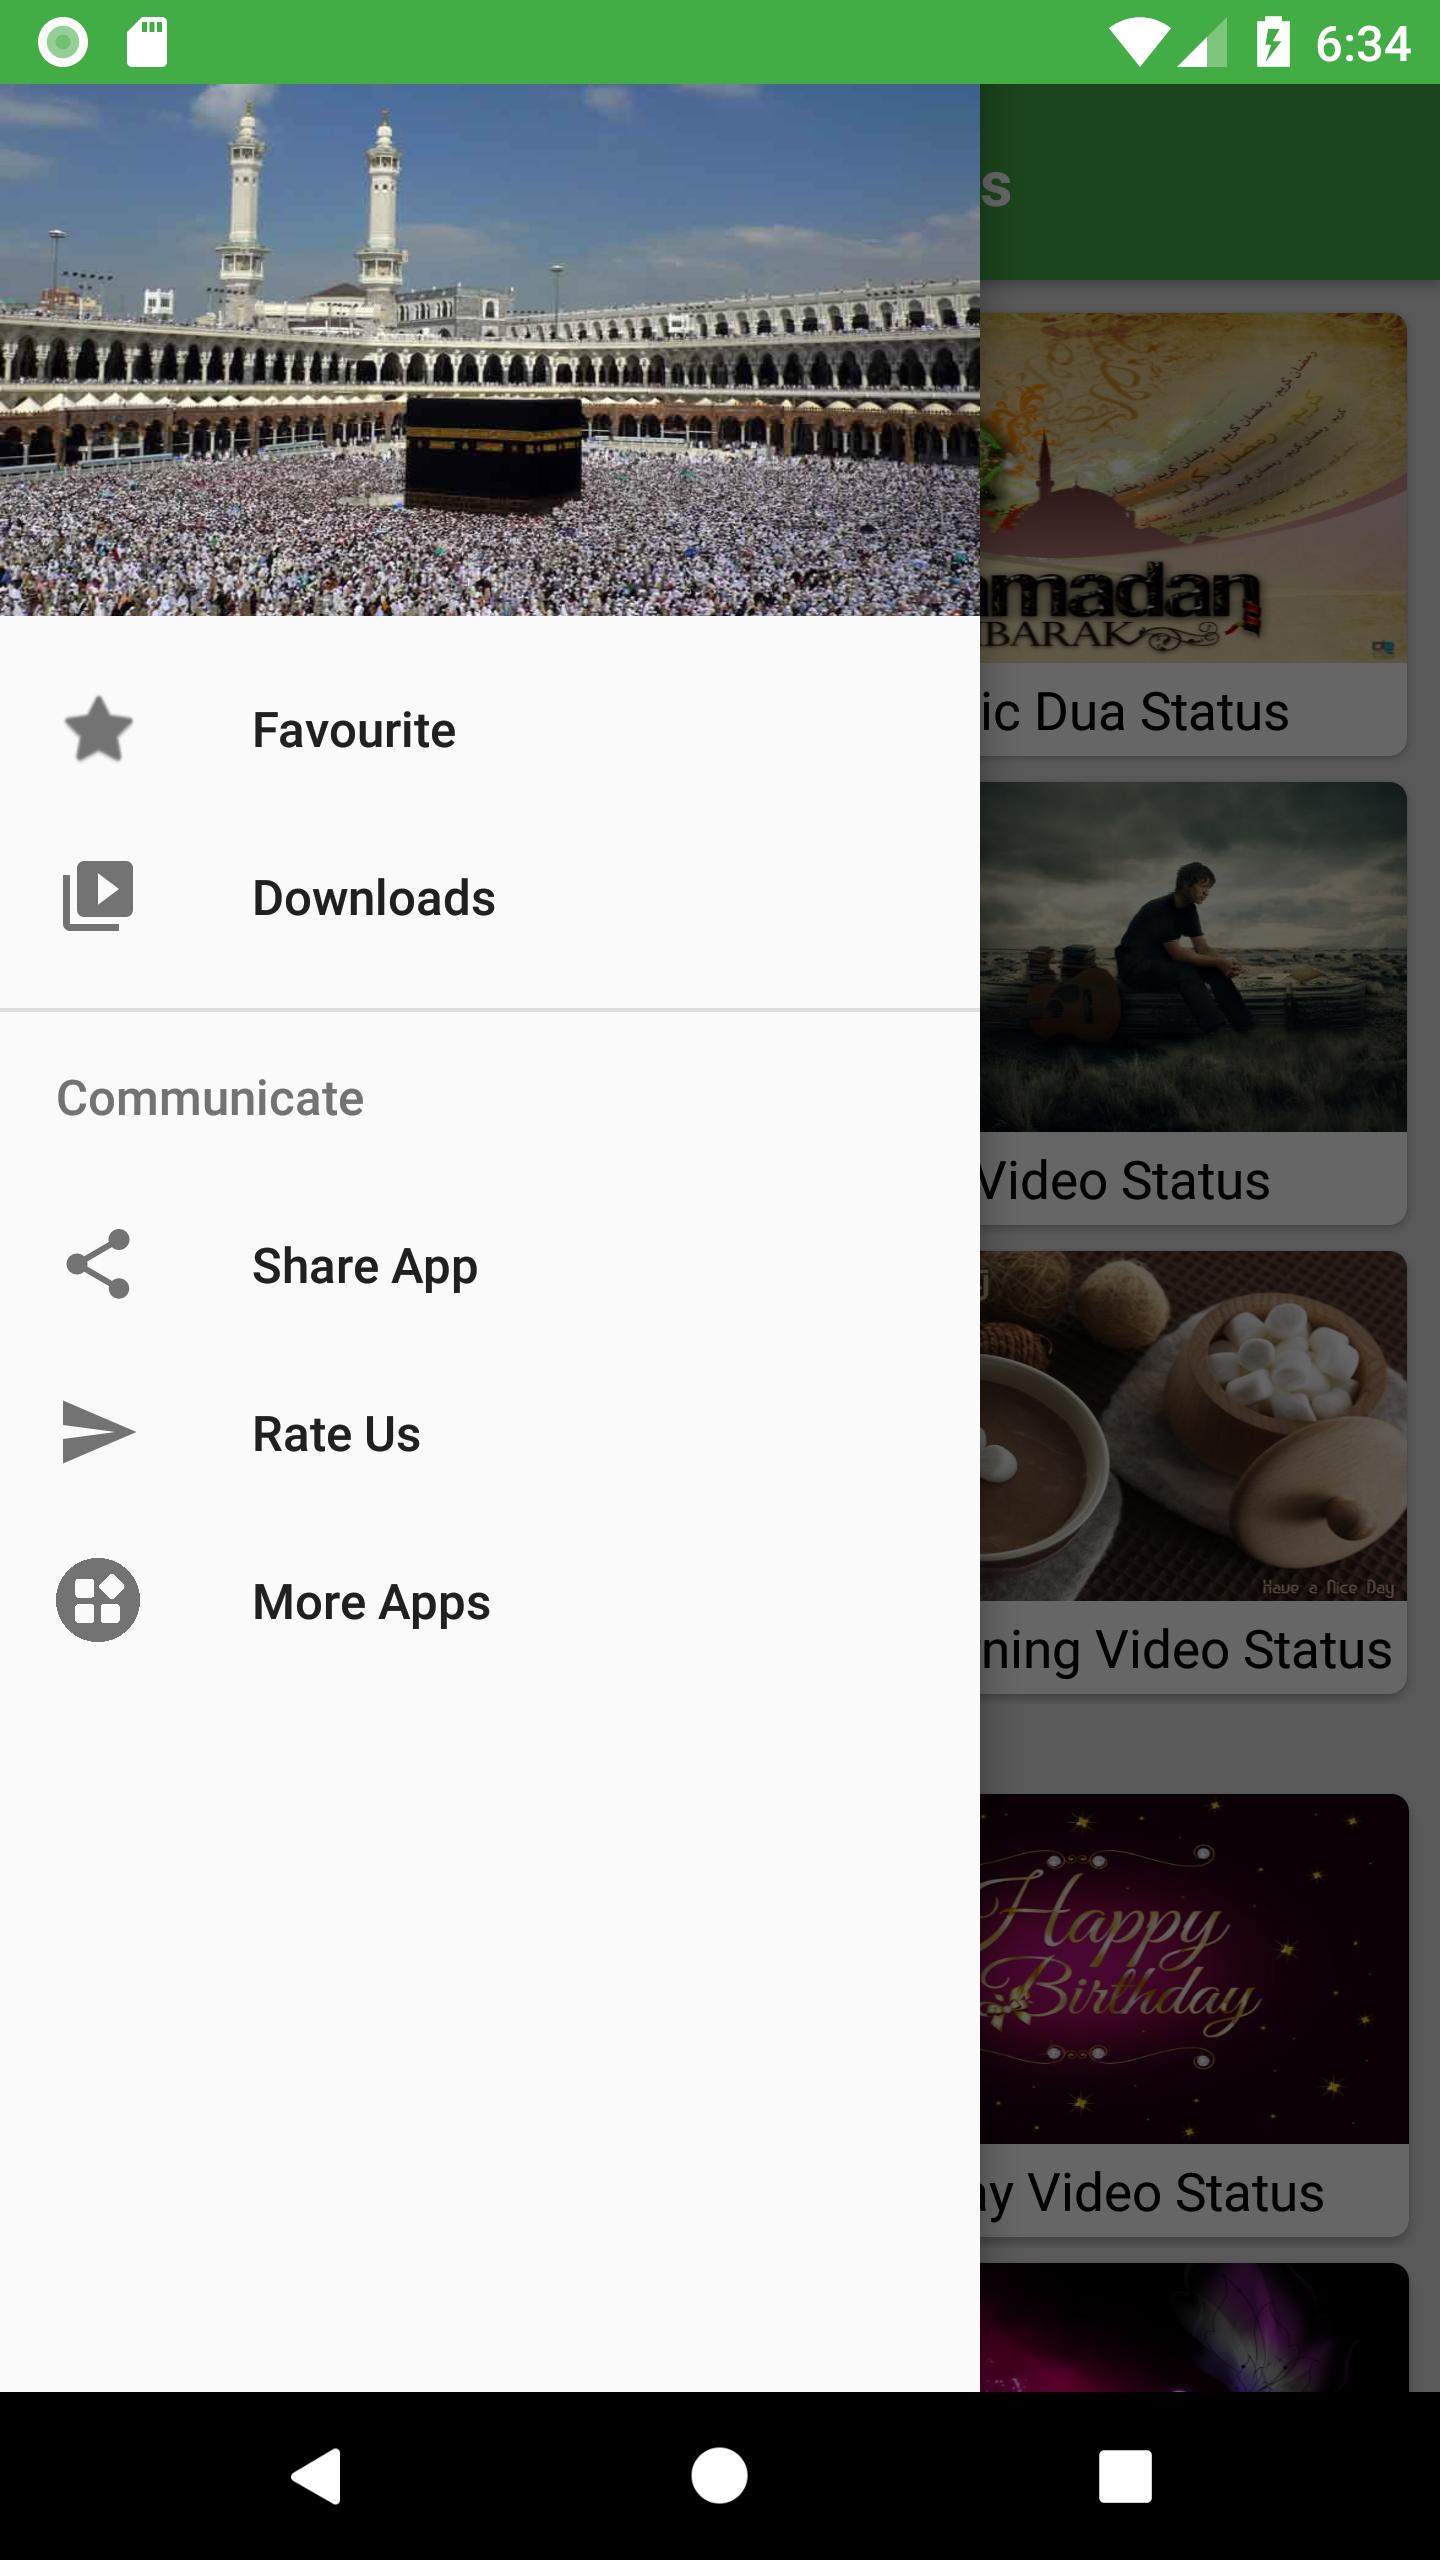 Islamic Video Status for Android - APK Download